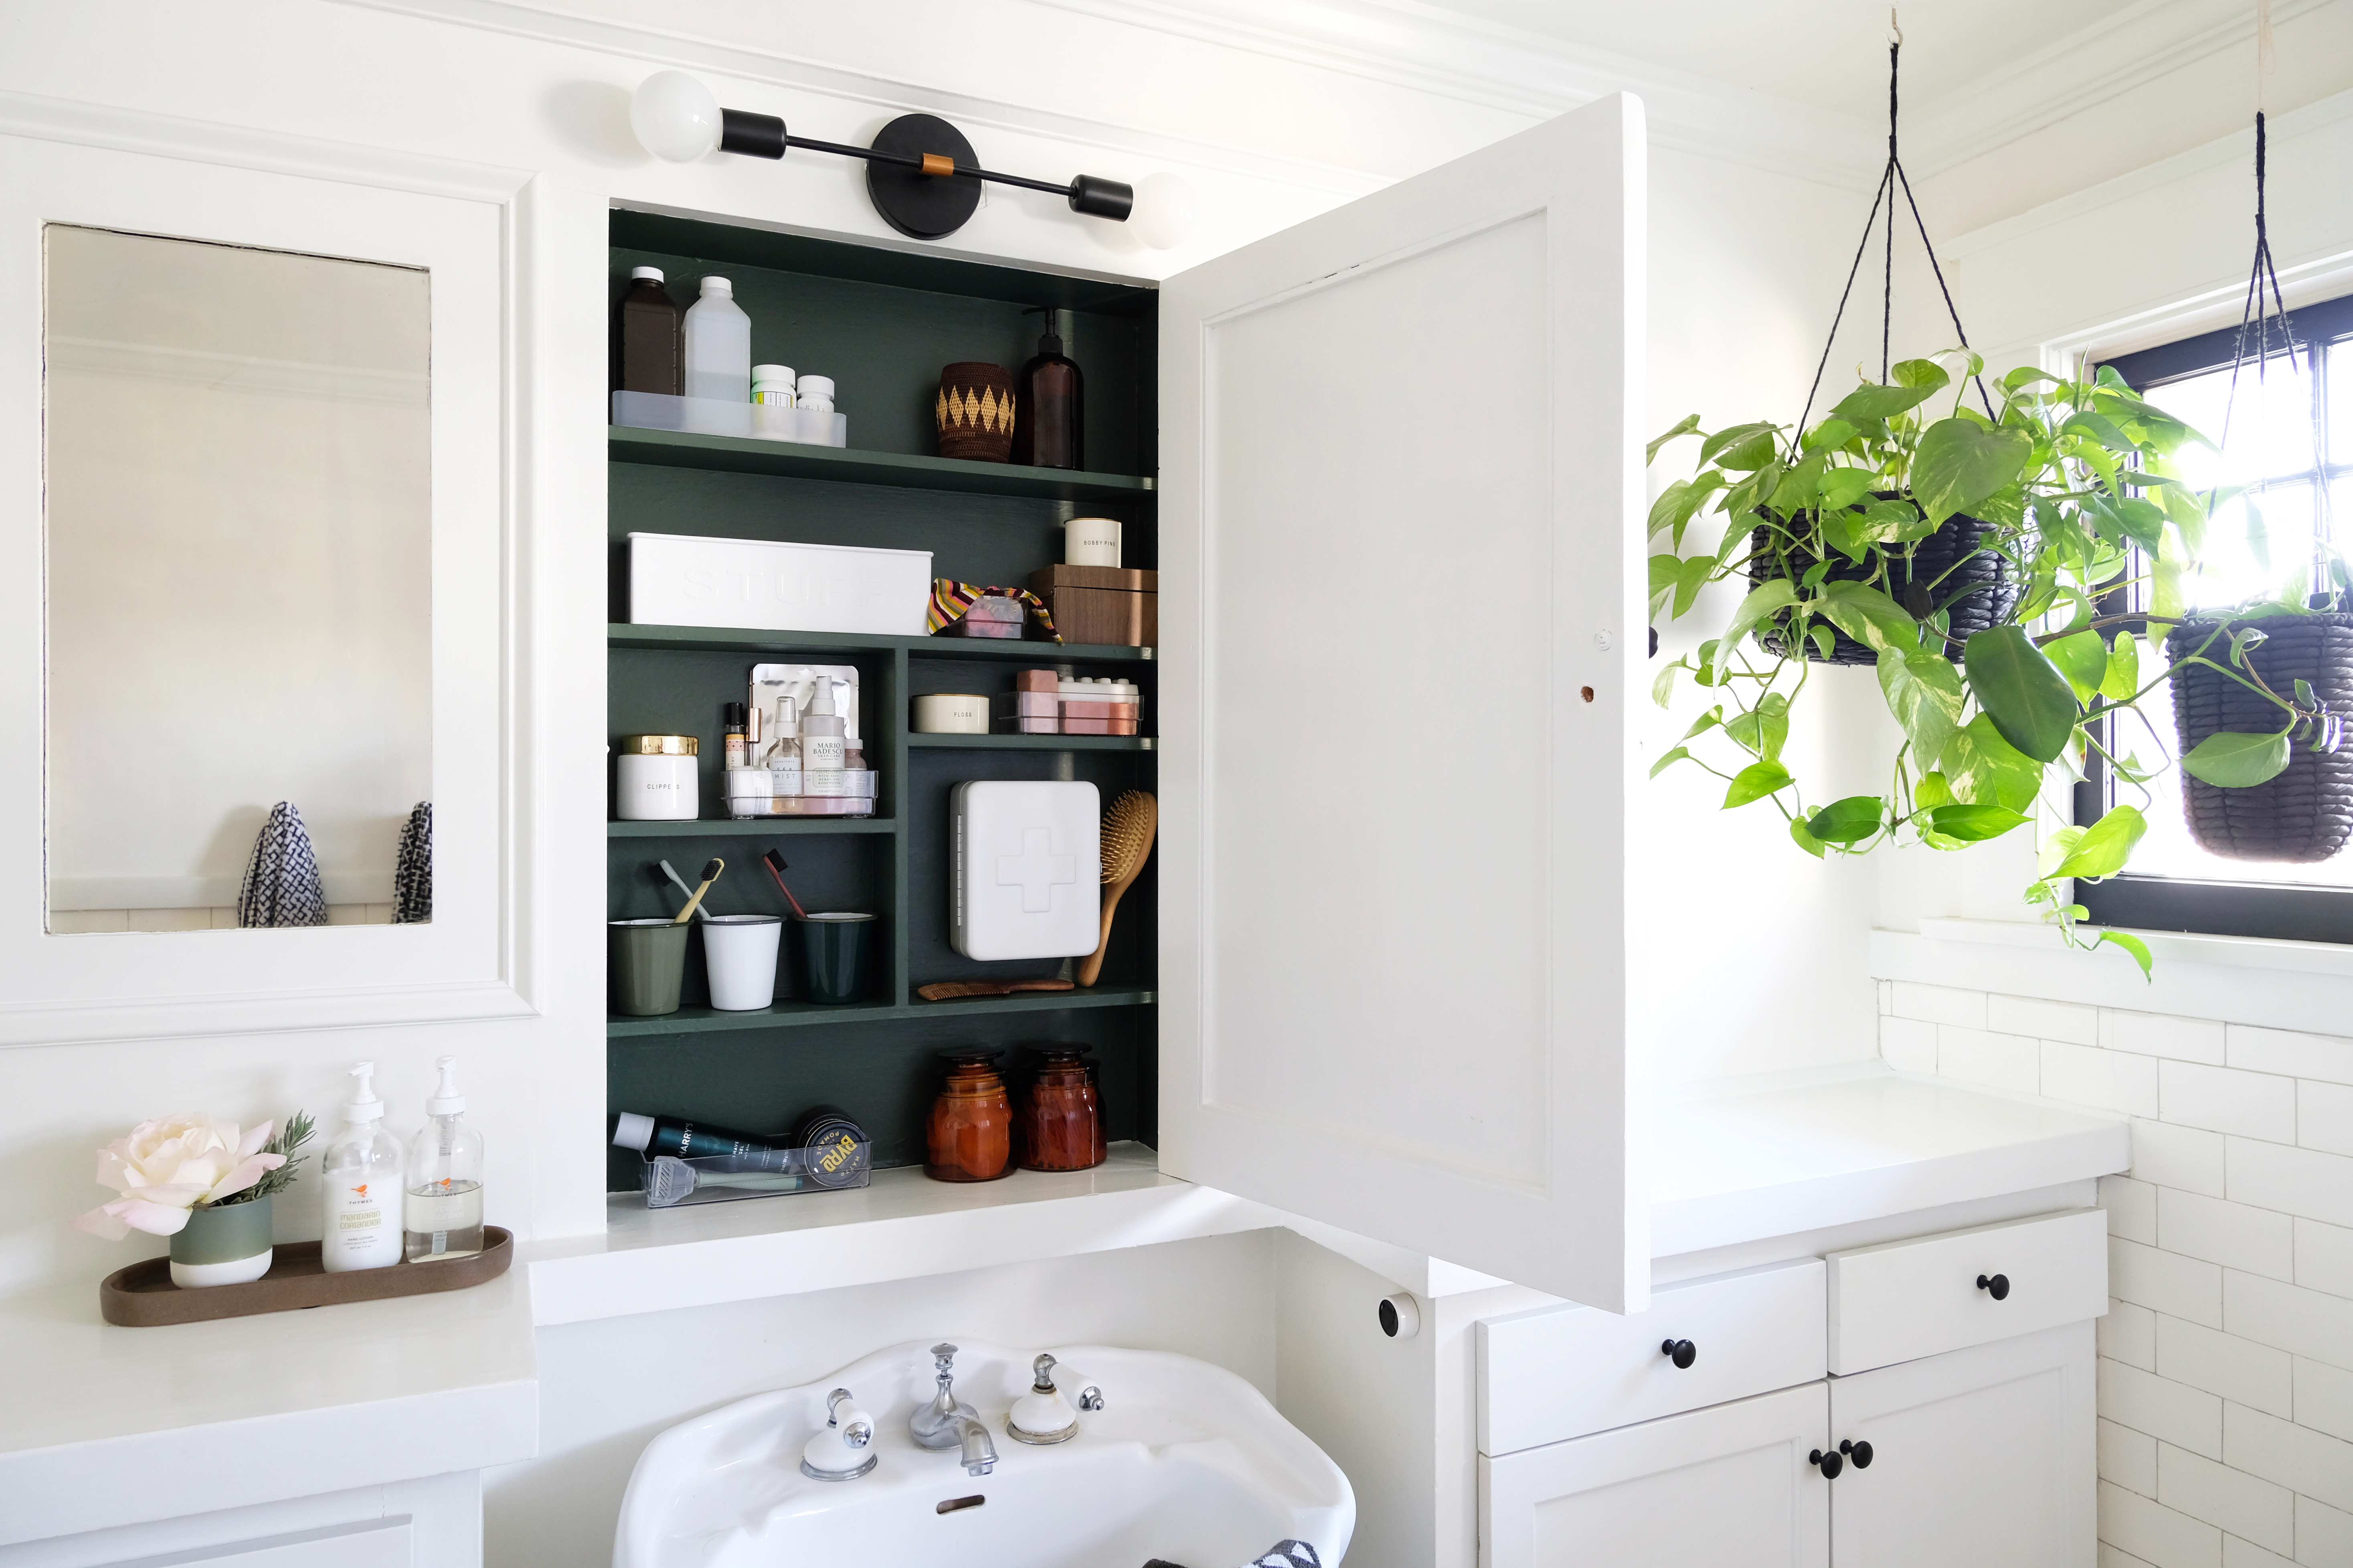 How To Install A Recessed Medicine Cabinet Hunker